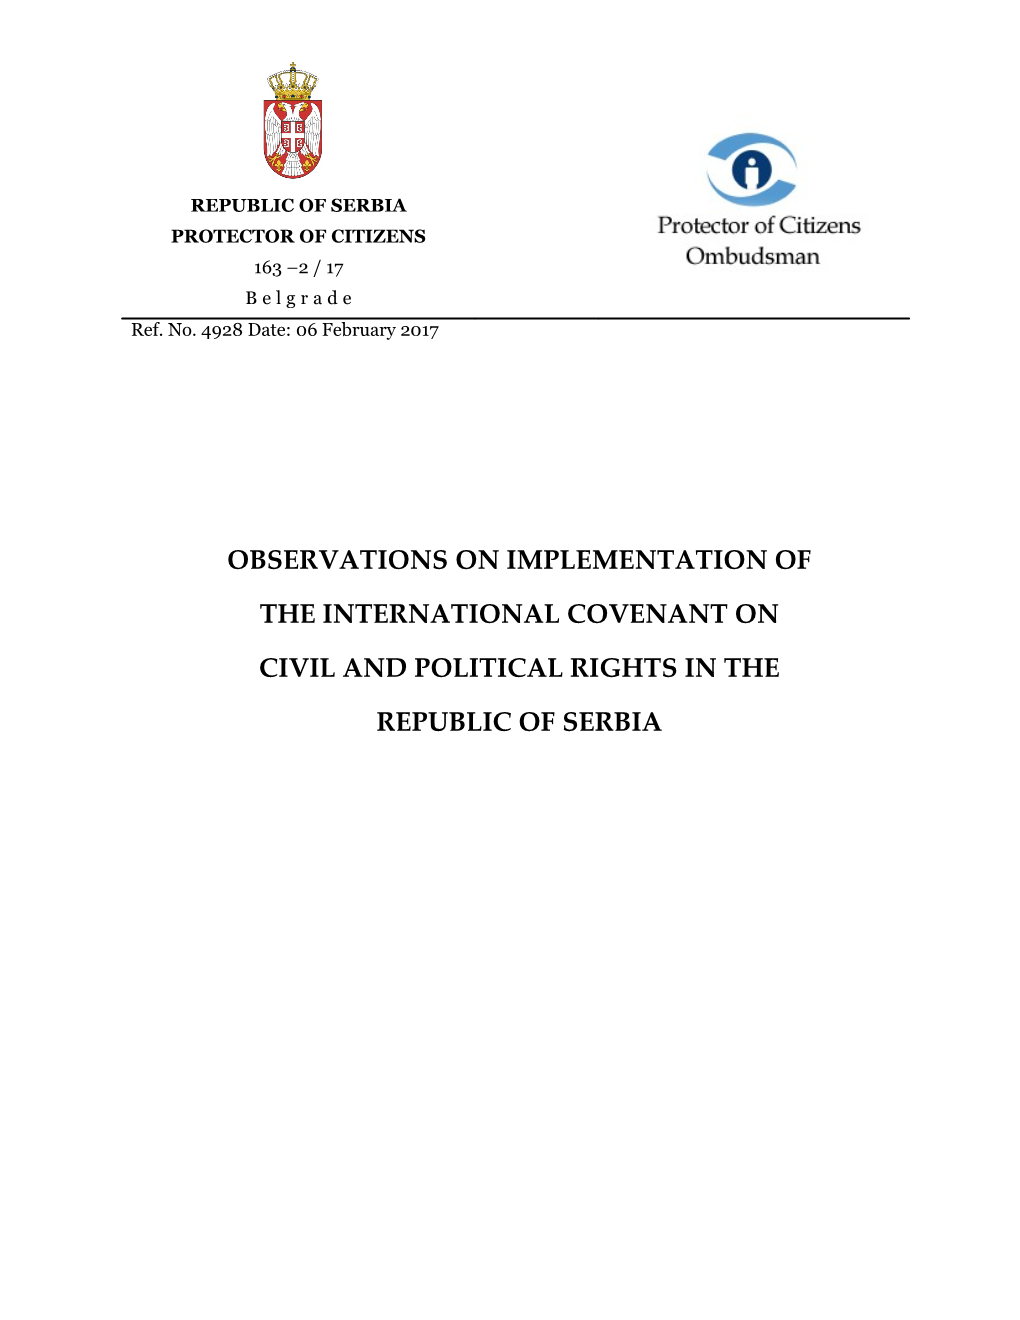 Observations on Implementation of the International Covenant on Civil and Political Rights